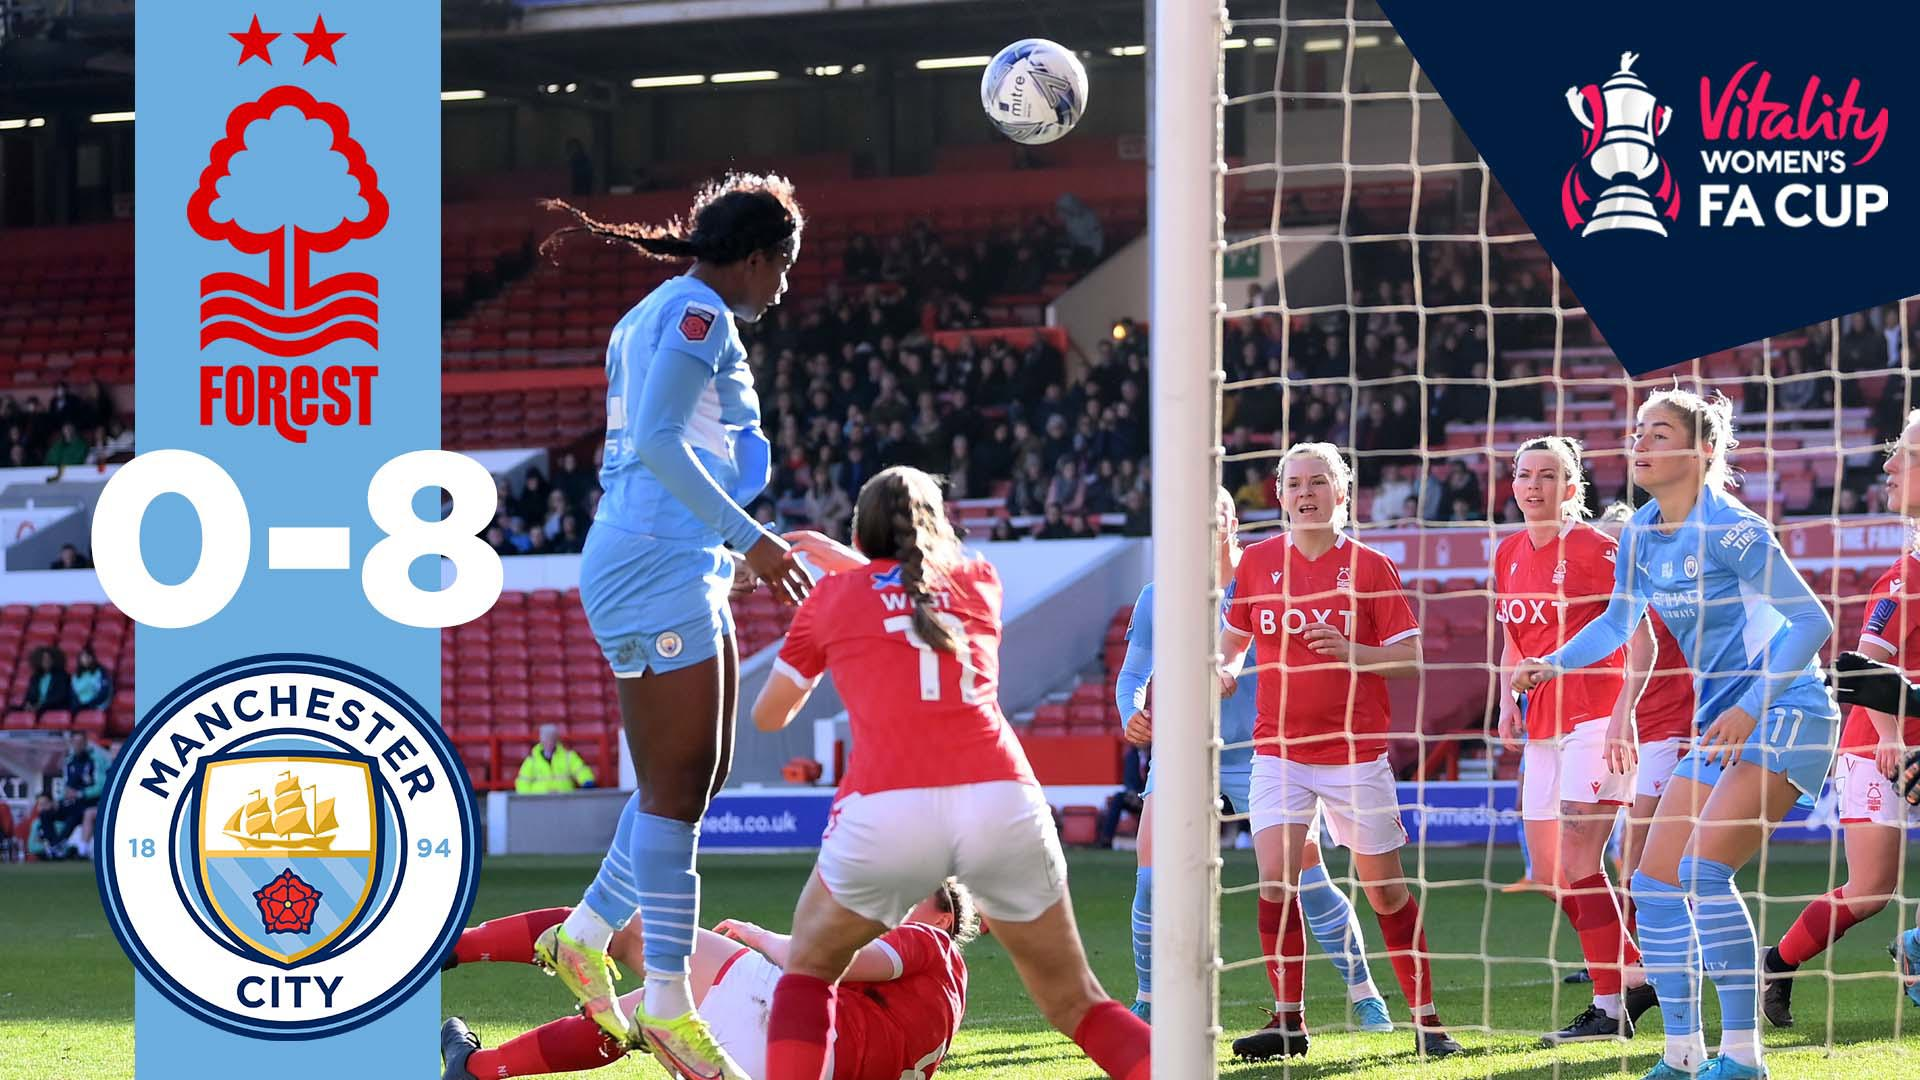  Women's FA Cup Highlights: Nottingham Forest 0-8 City